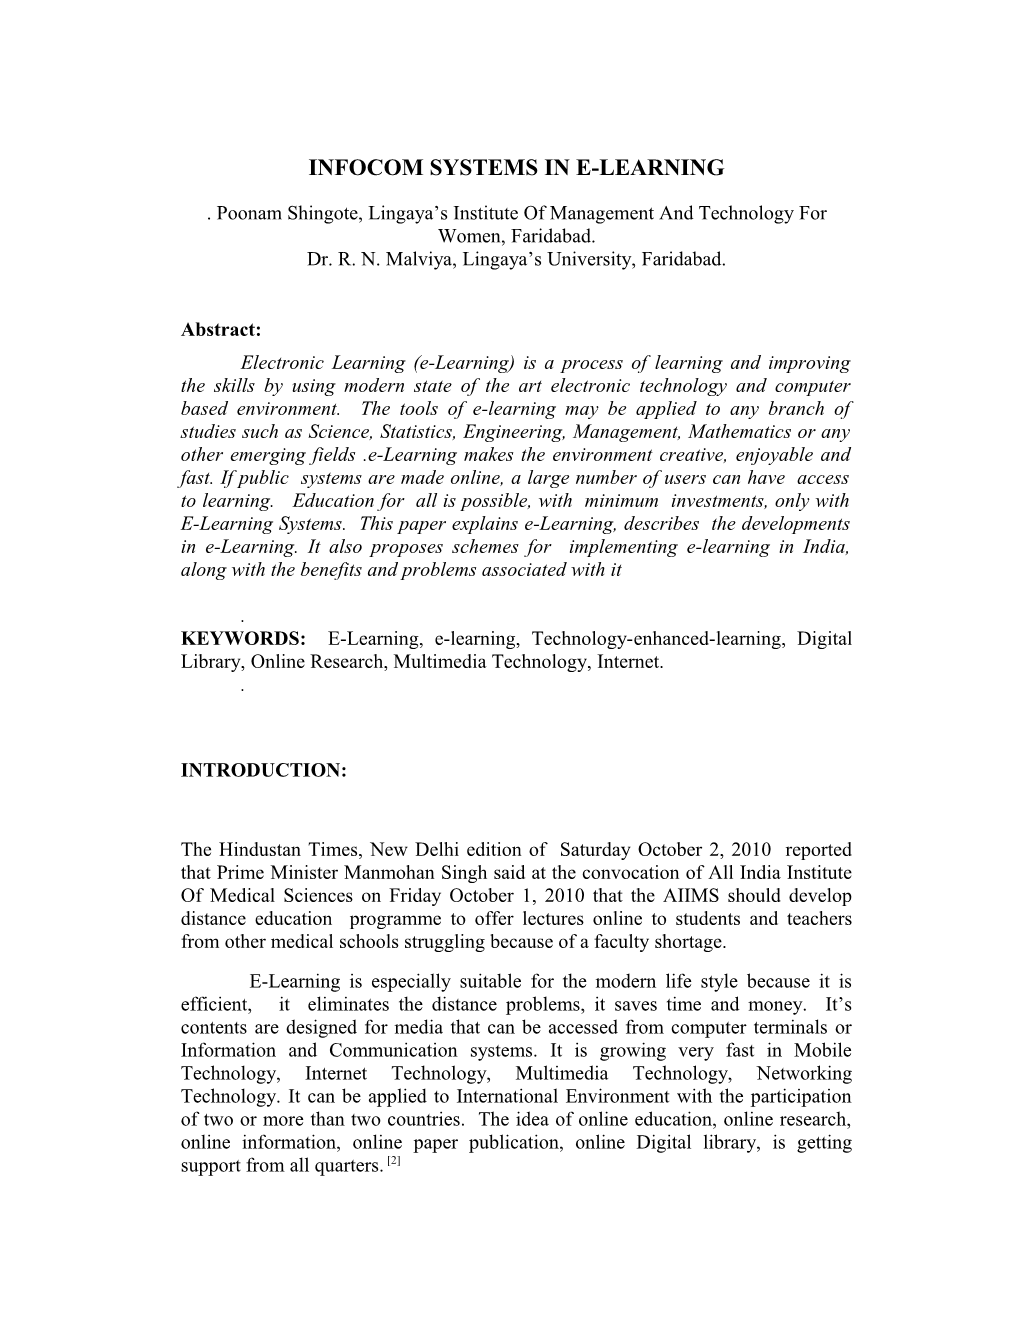 Infocom Systems in E-Learning